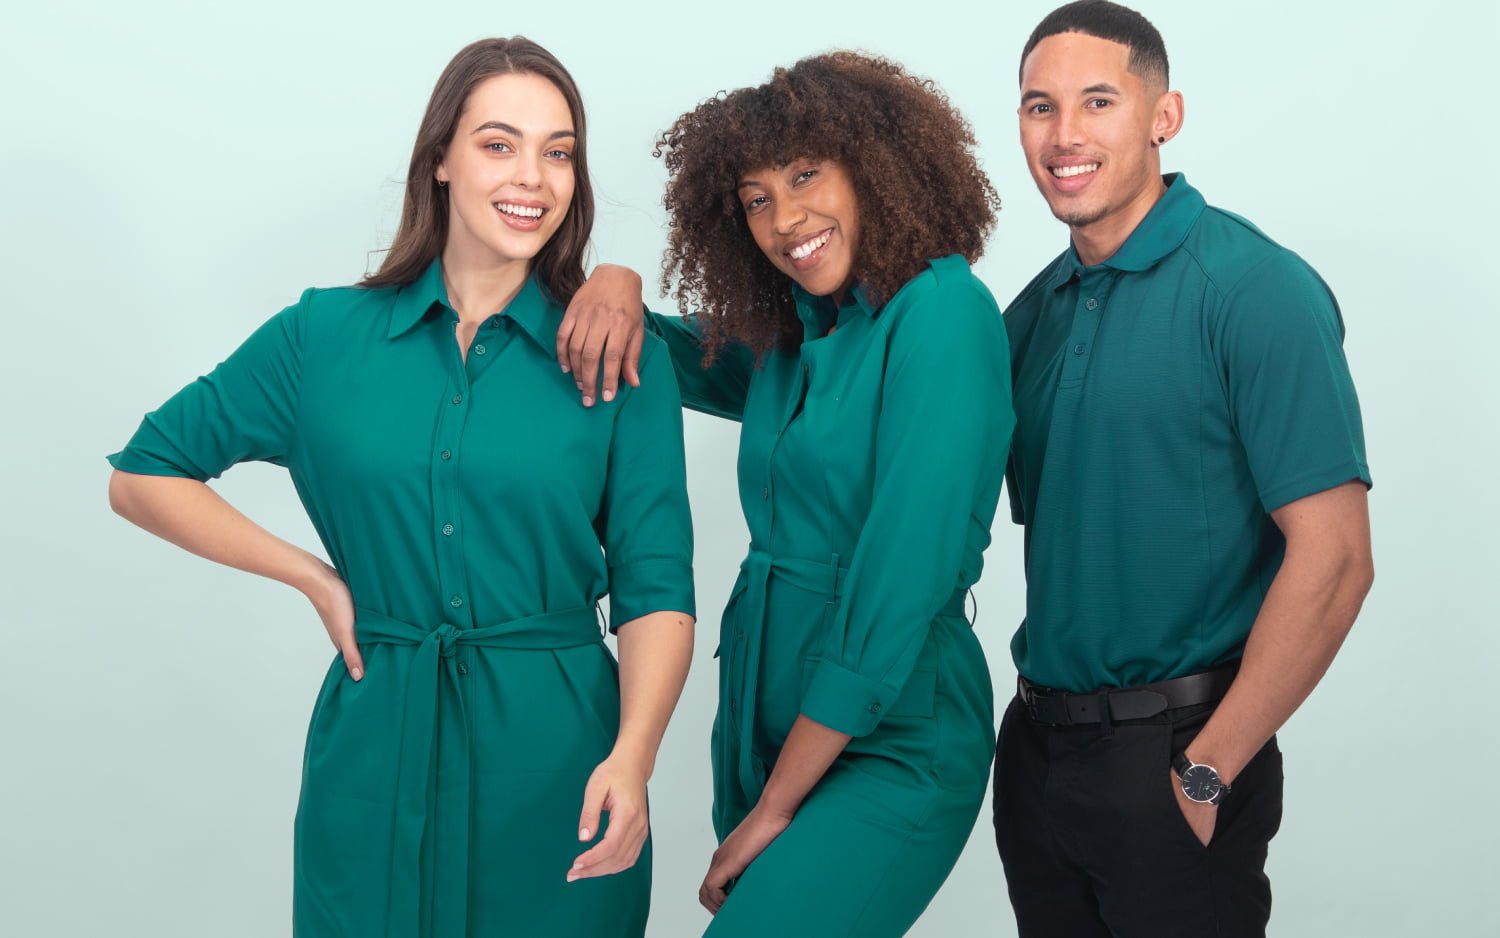 The banner for the article 'Creating a Killer Uniform for Your Team' depicts two female and one male model posing together in front of a pale mint background. They are each smiling for the camera and wearing coordinating teal coloured uniforms manufactured by Designs To You. Together, they look professional, confident and stylish.